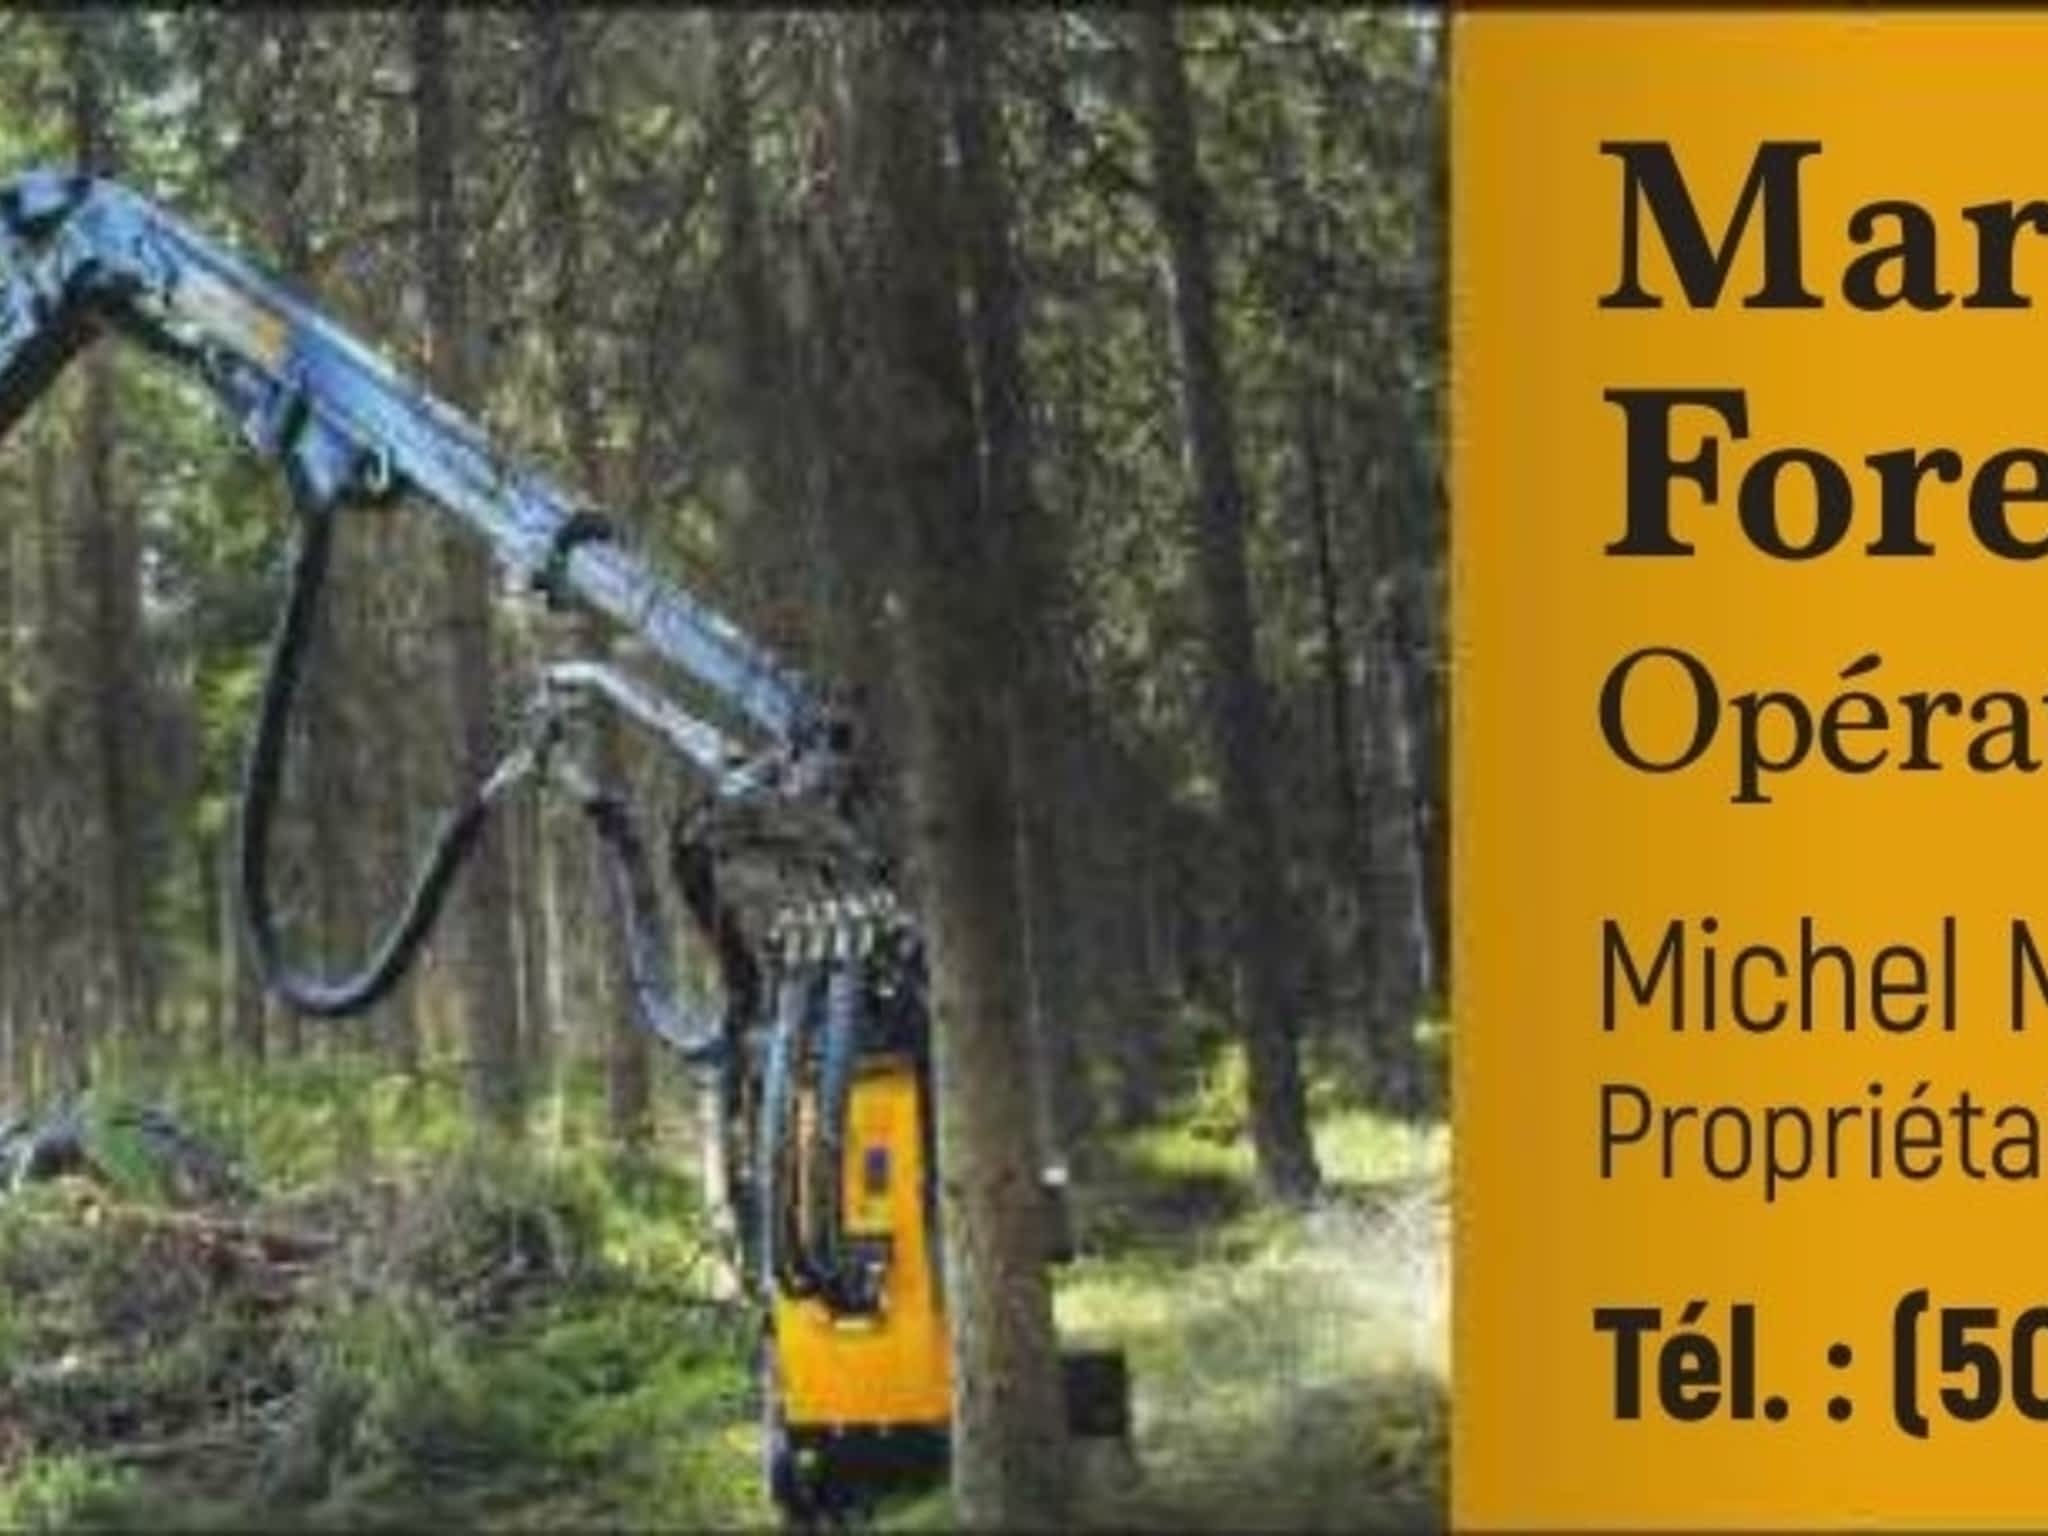 photo Marchand Forestry inc